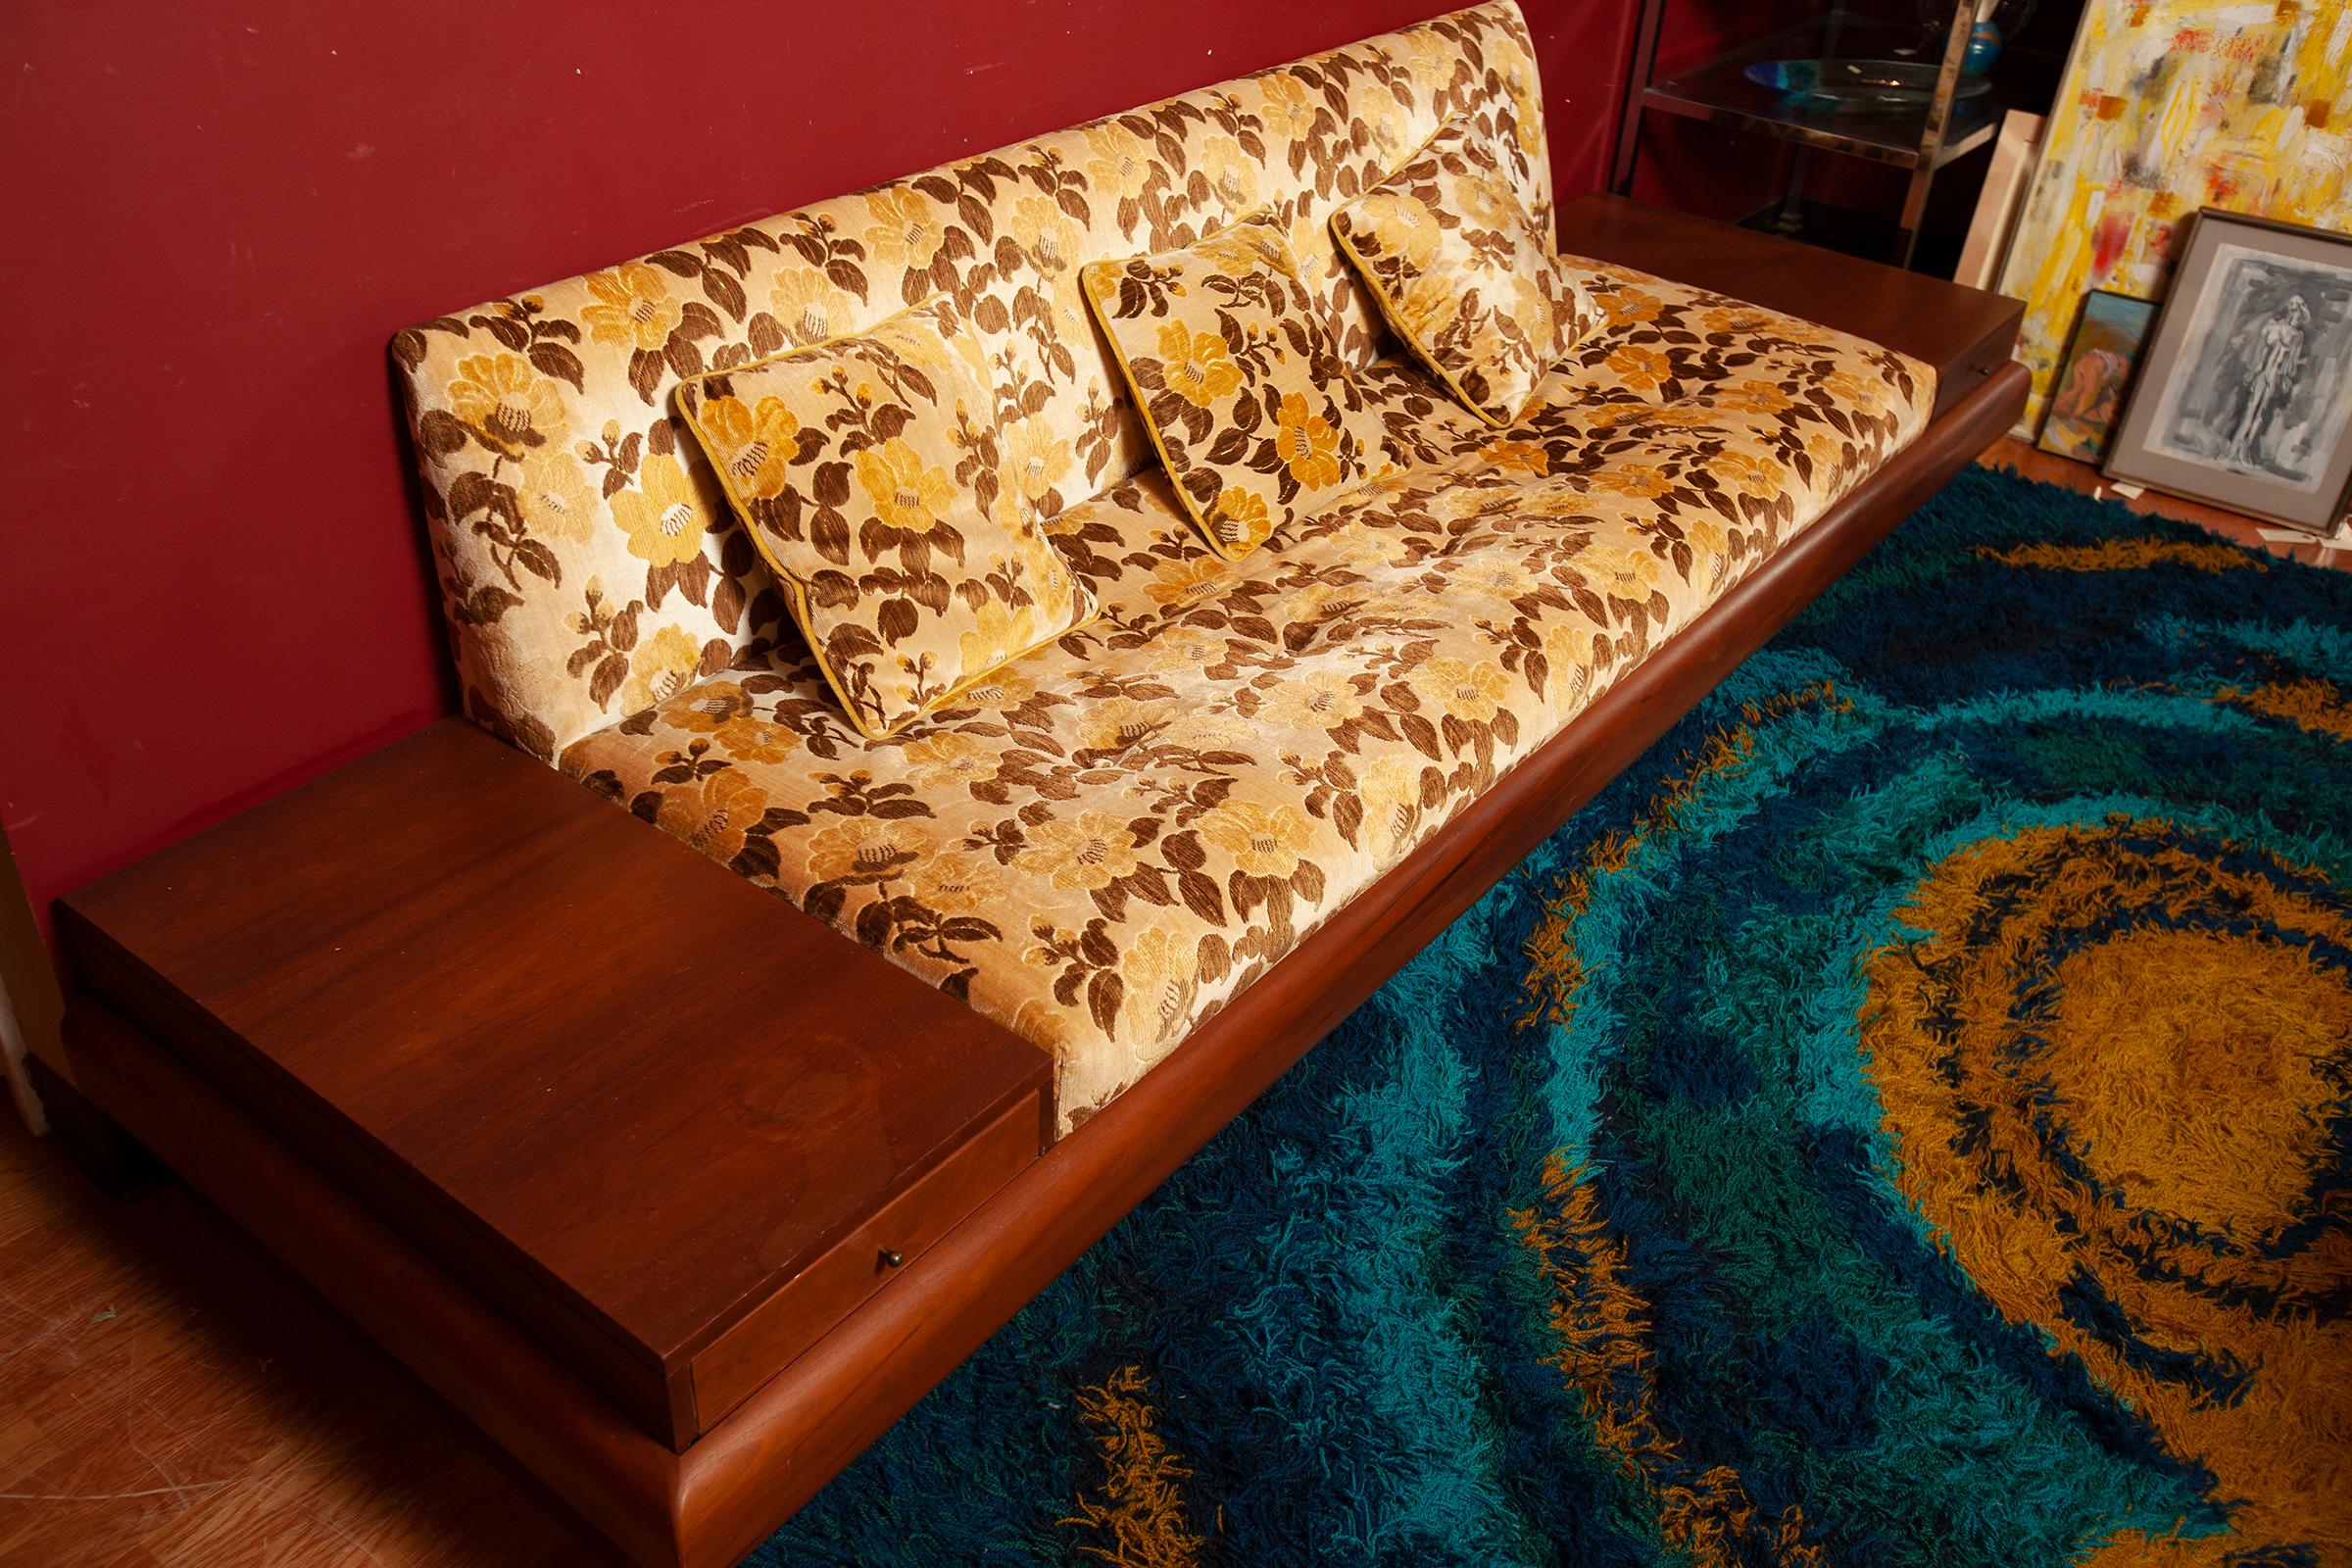 Super rare and groovy this sofa is in amazing original condition. Midcentury at its max. Original flower and leaf velour upholstery in gold and brown on a beige background with 3 matching toss cushions. Attached walnut drawers on each side match